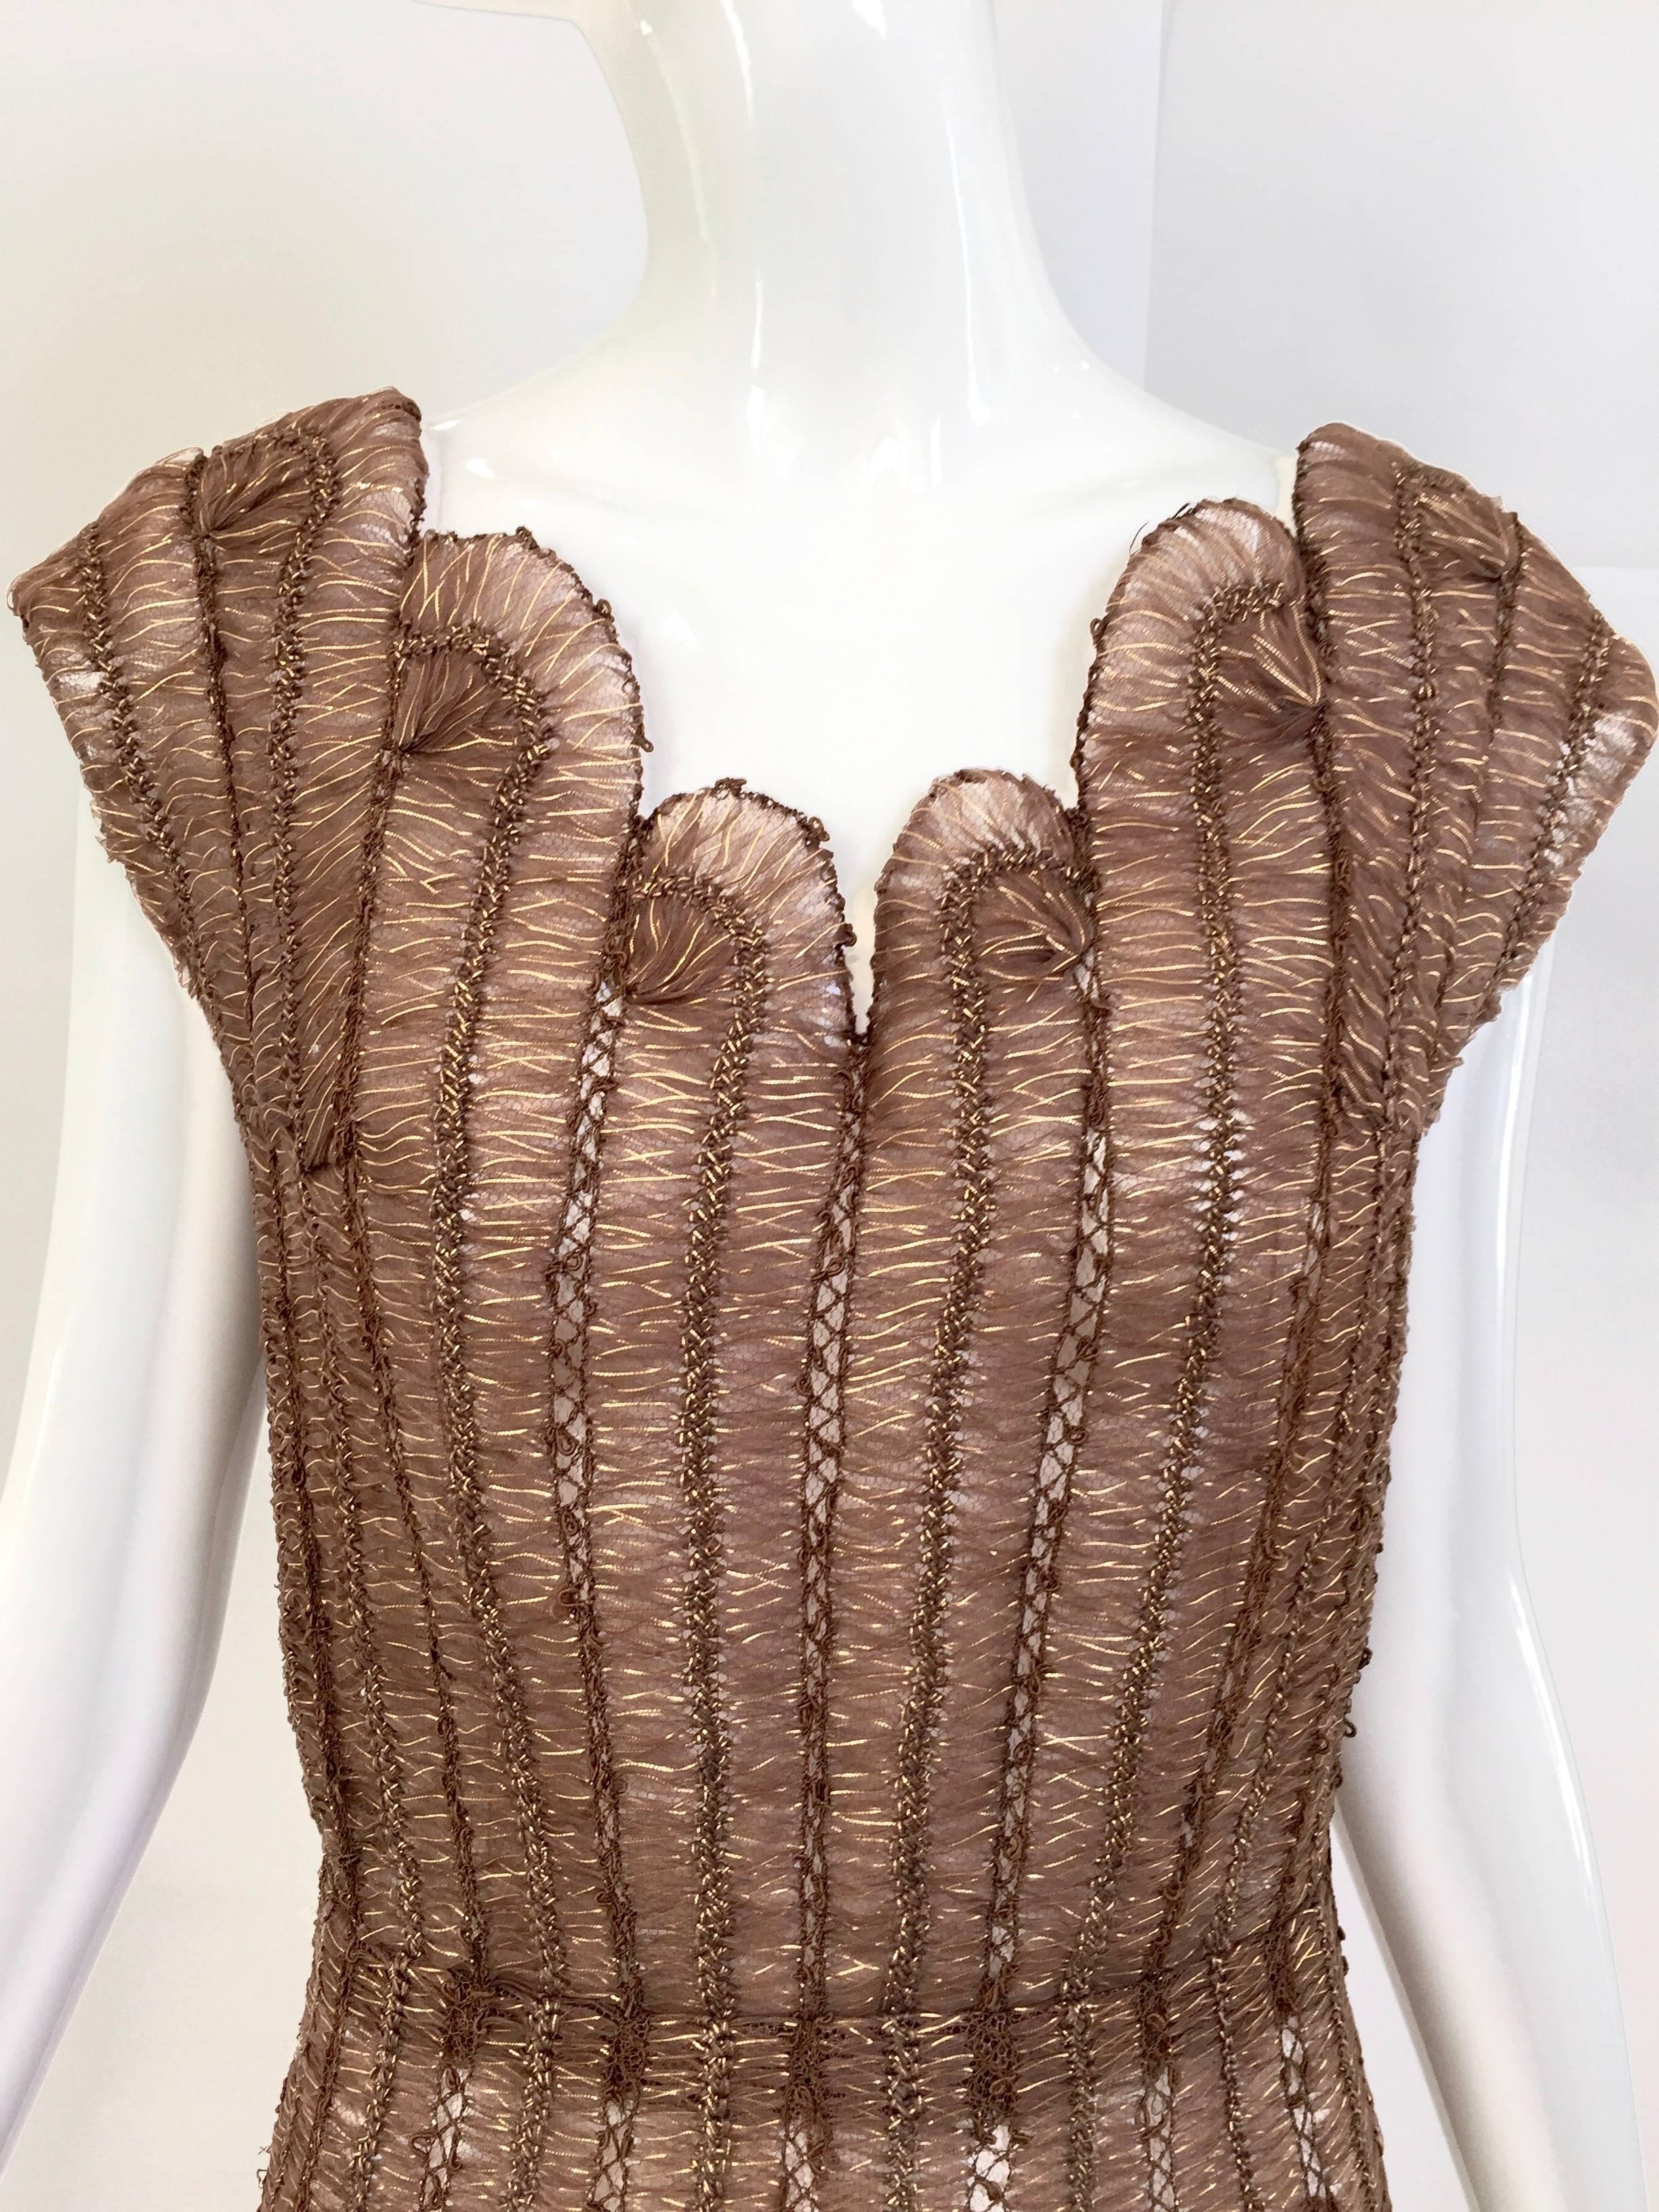 Beautiful 1950s metallic brown  custom made cocktail dress. Woven silk ribbon in brown and gold color. Cap sleeve and sweet heart neckline. A line skirt. Classic 1950s dress. Medium / Size 6
Bust : 36 (fit C cup)
Waist: 28"
Length: